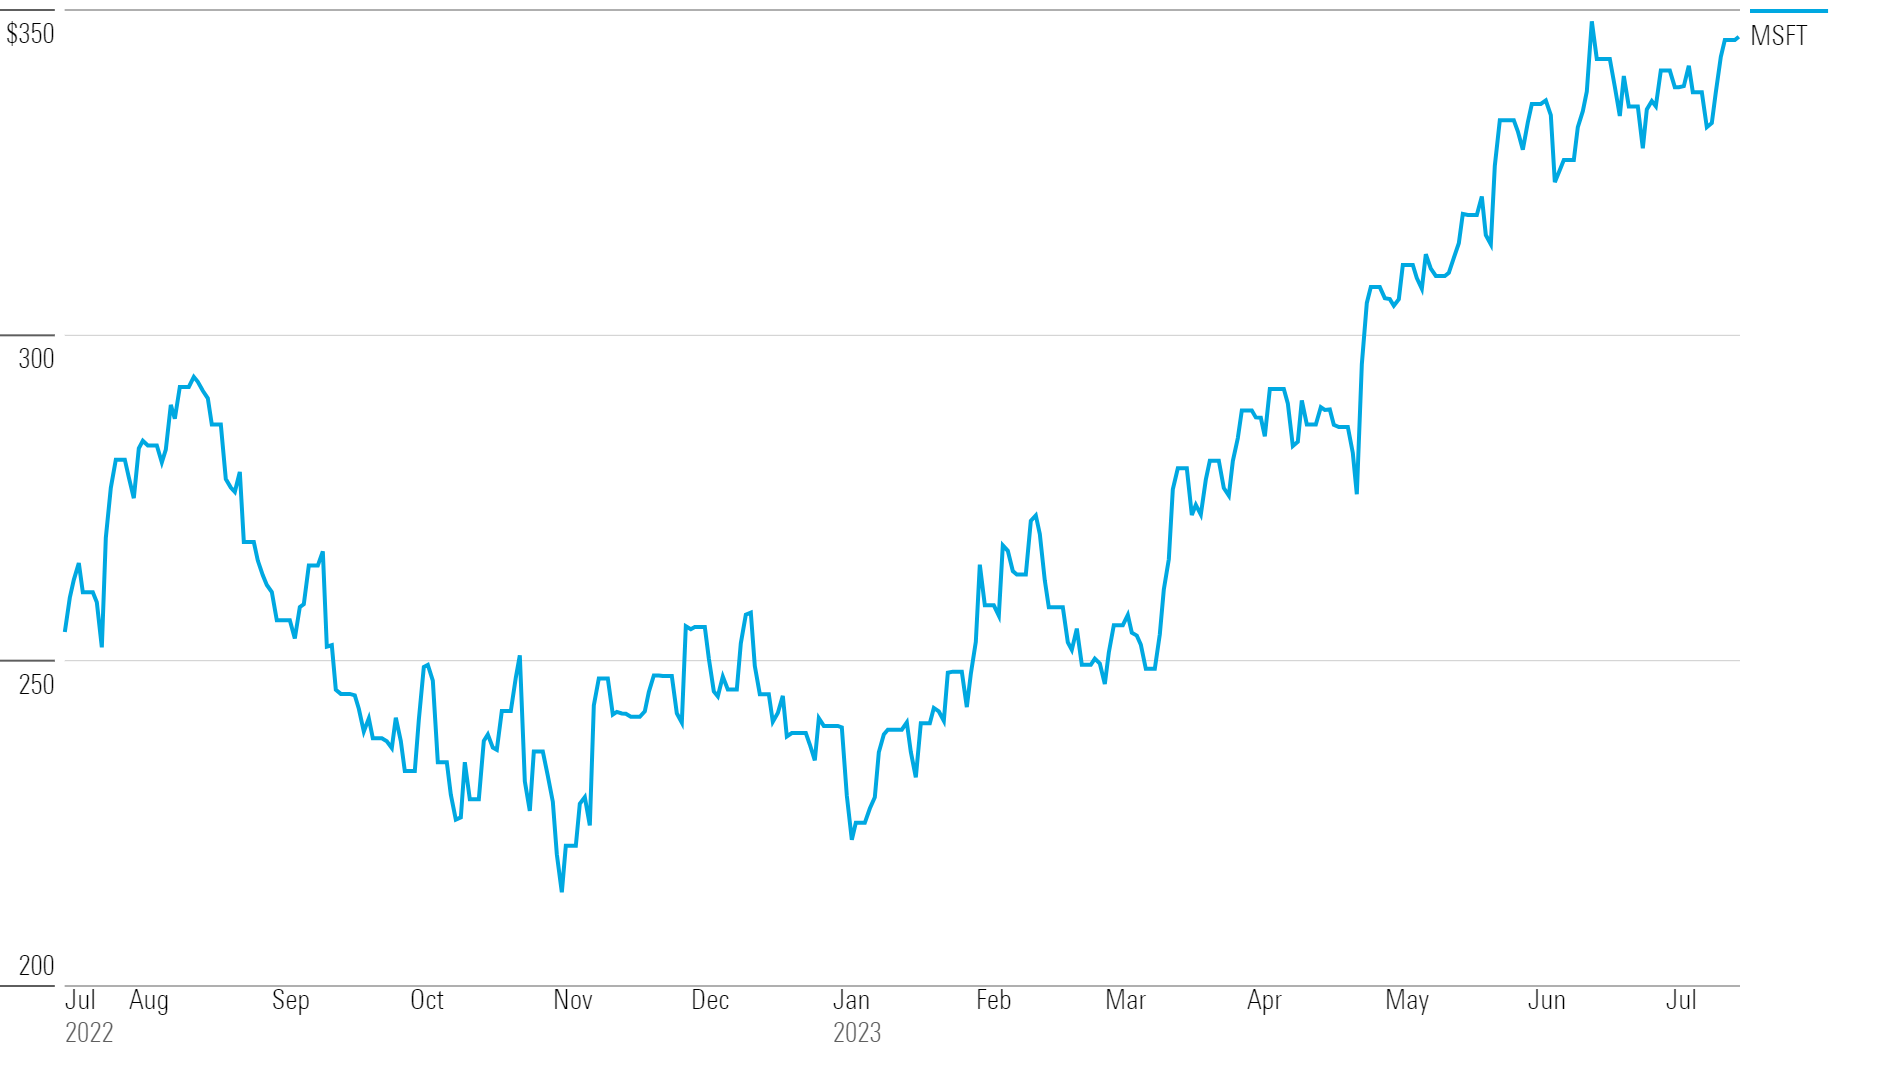 Line chart showing one year of Microsoft's stock price history through July 2023